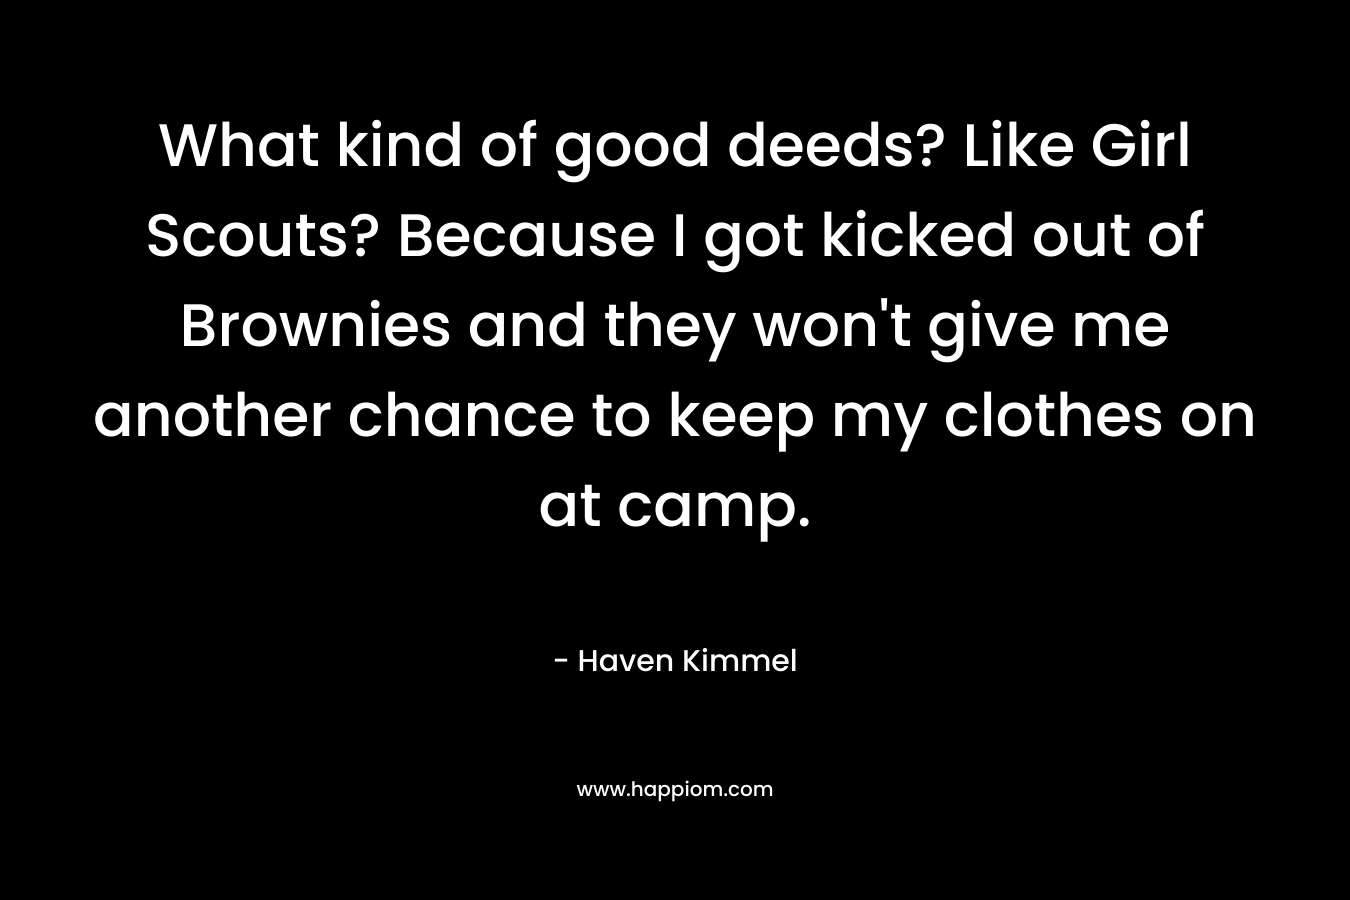 What kind of good deeds? Like Girl Scouts? Because I got kicked out of Brownies and they won’t give me another chance to keep my clothes on at camp. – Haven Kimmel